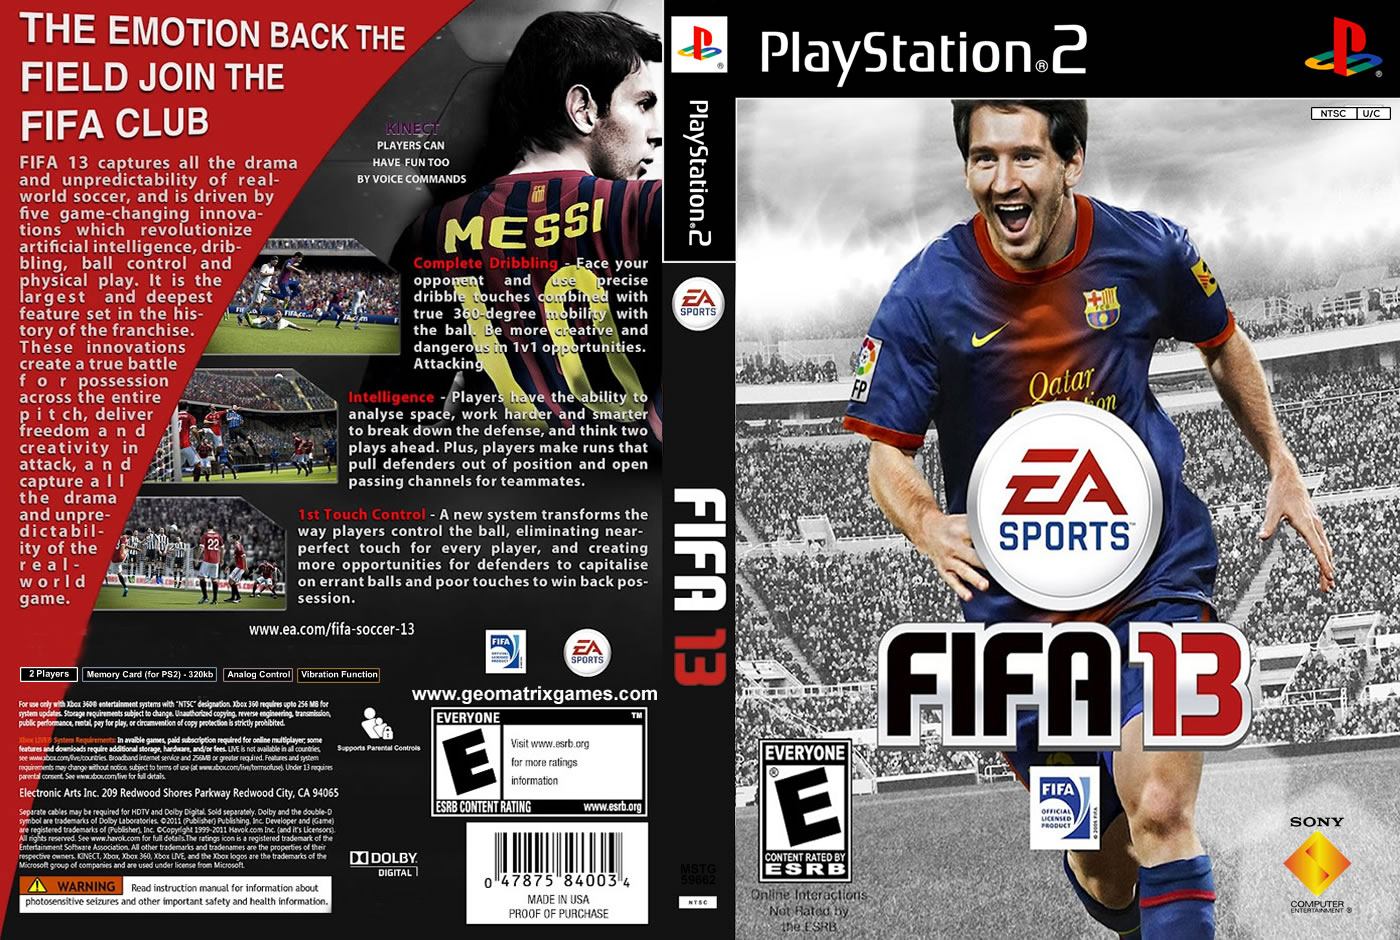 Fifa 08 free download for pc compressed